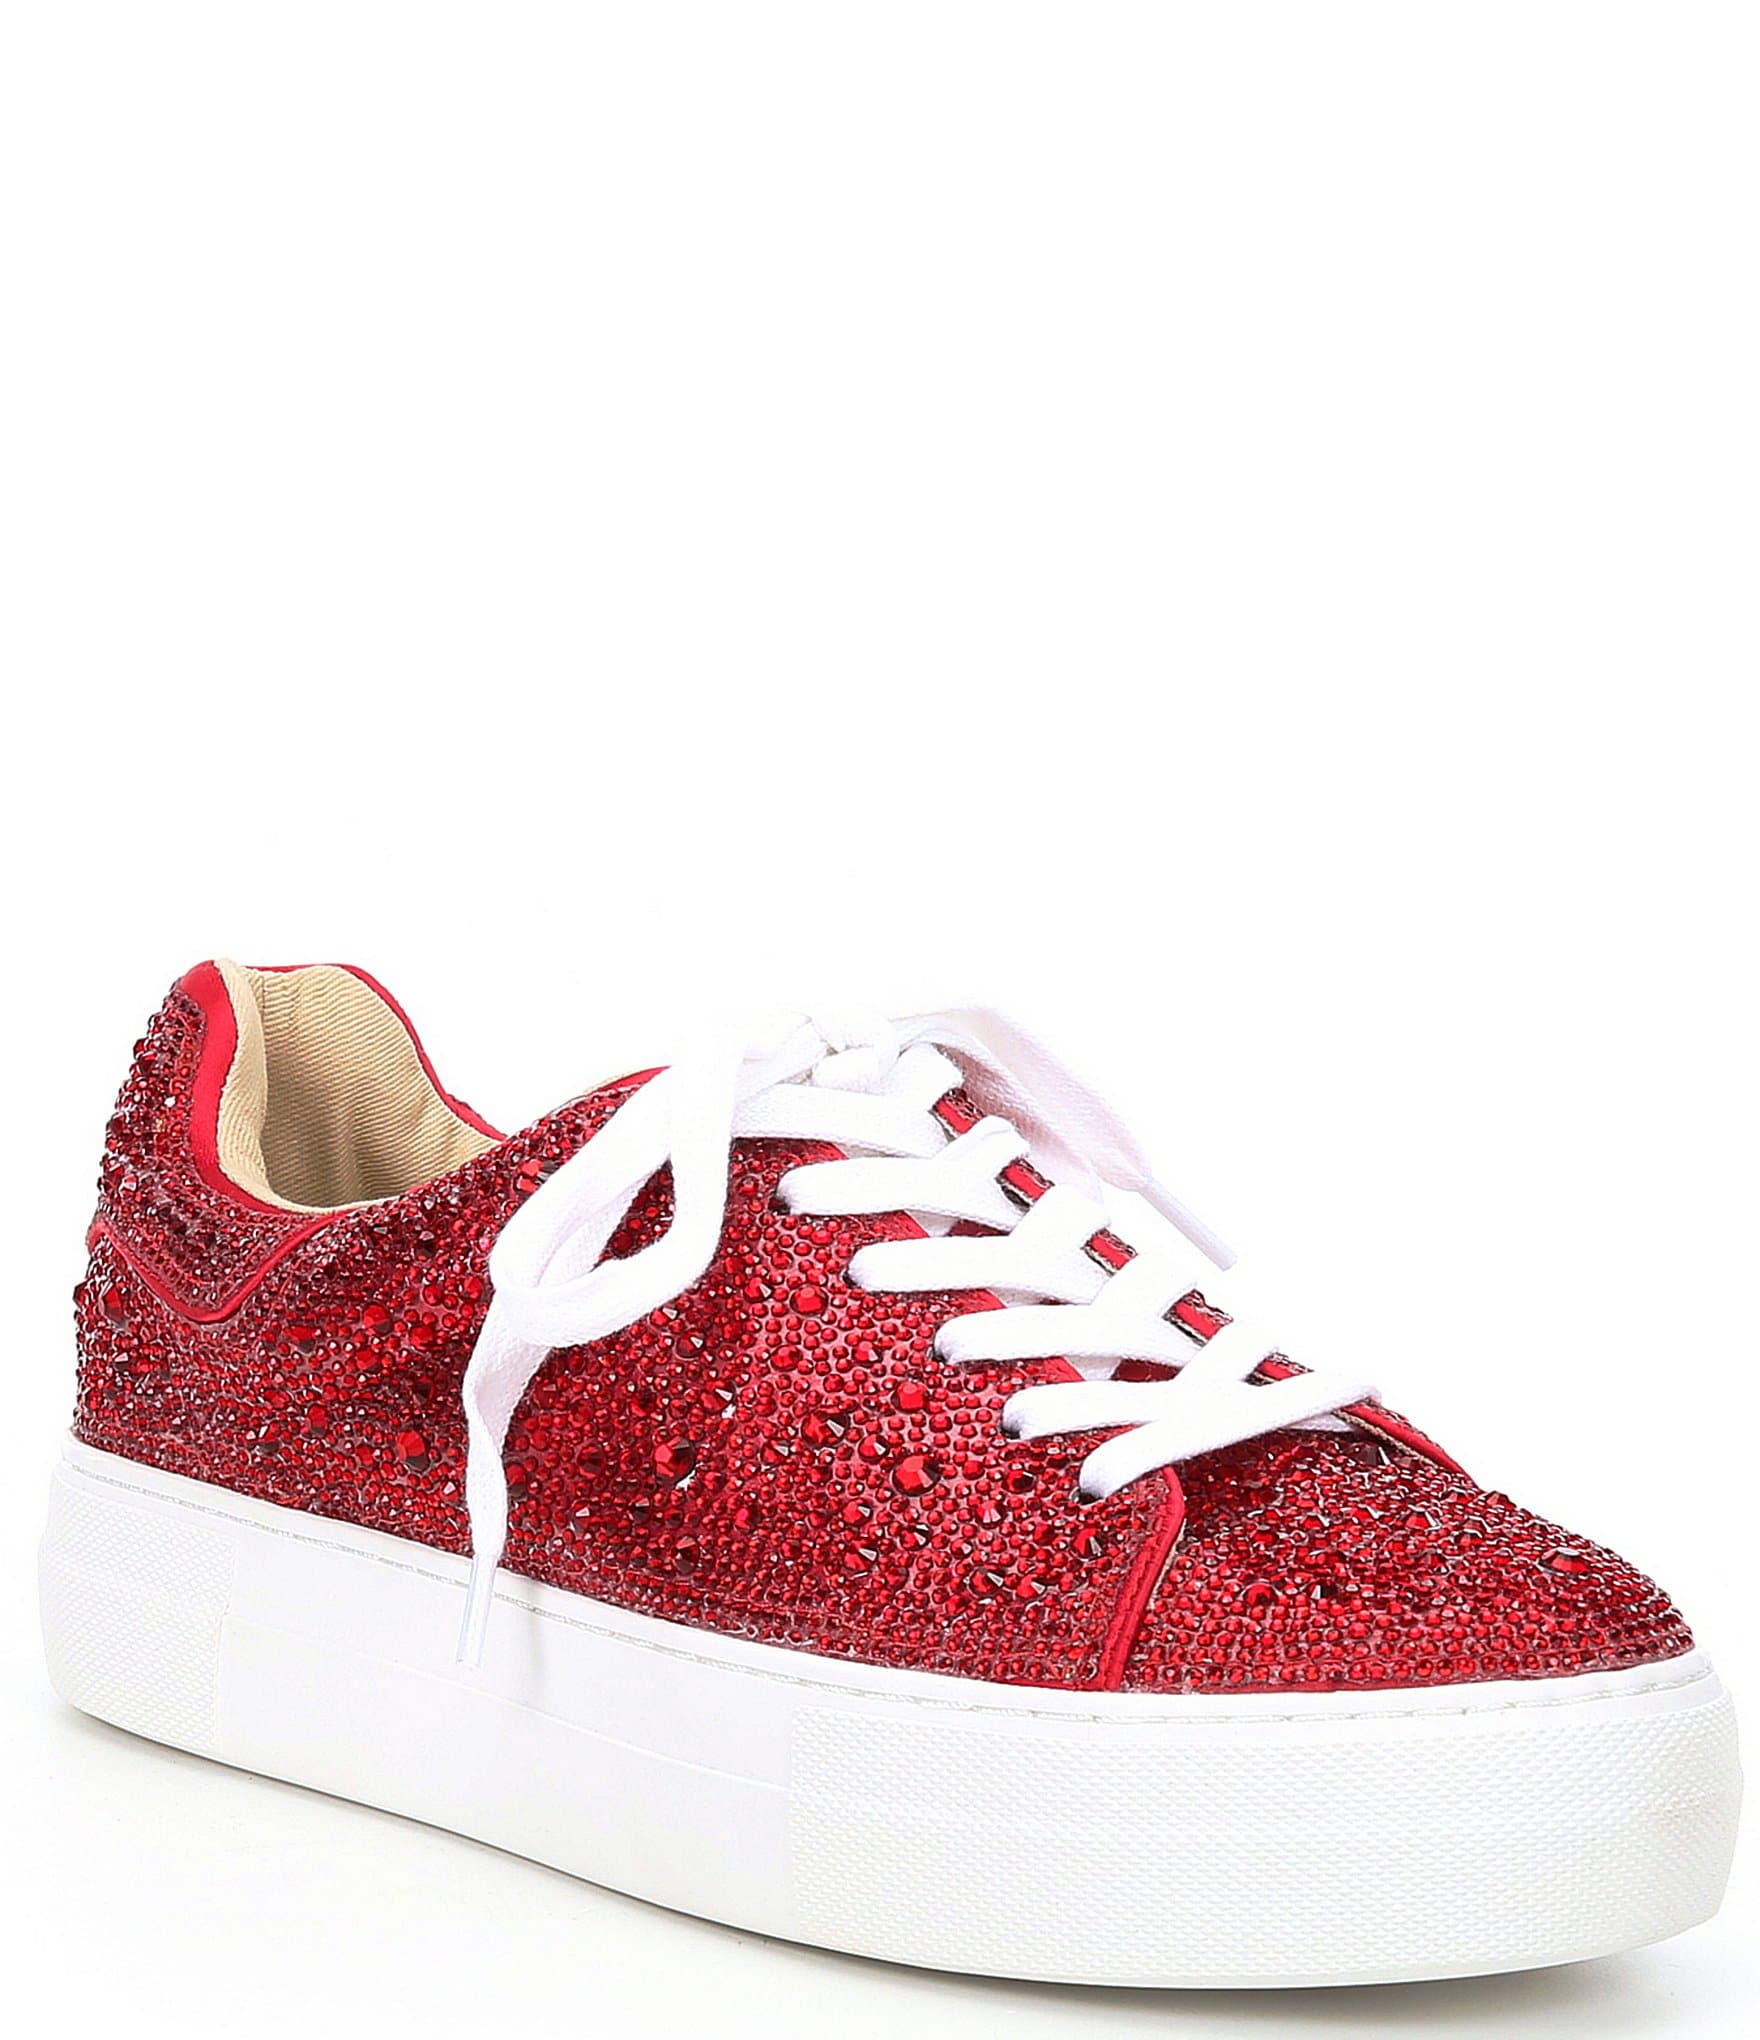 Total 48+ imagen red tennis shoes womens - Abzlocal.mx